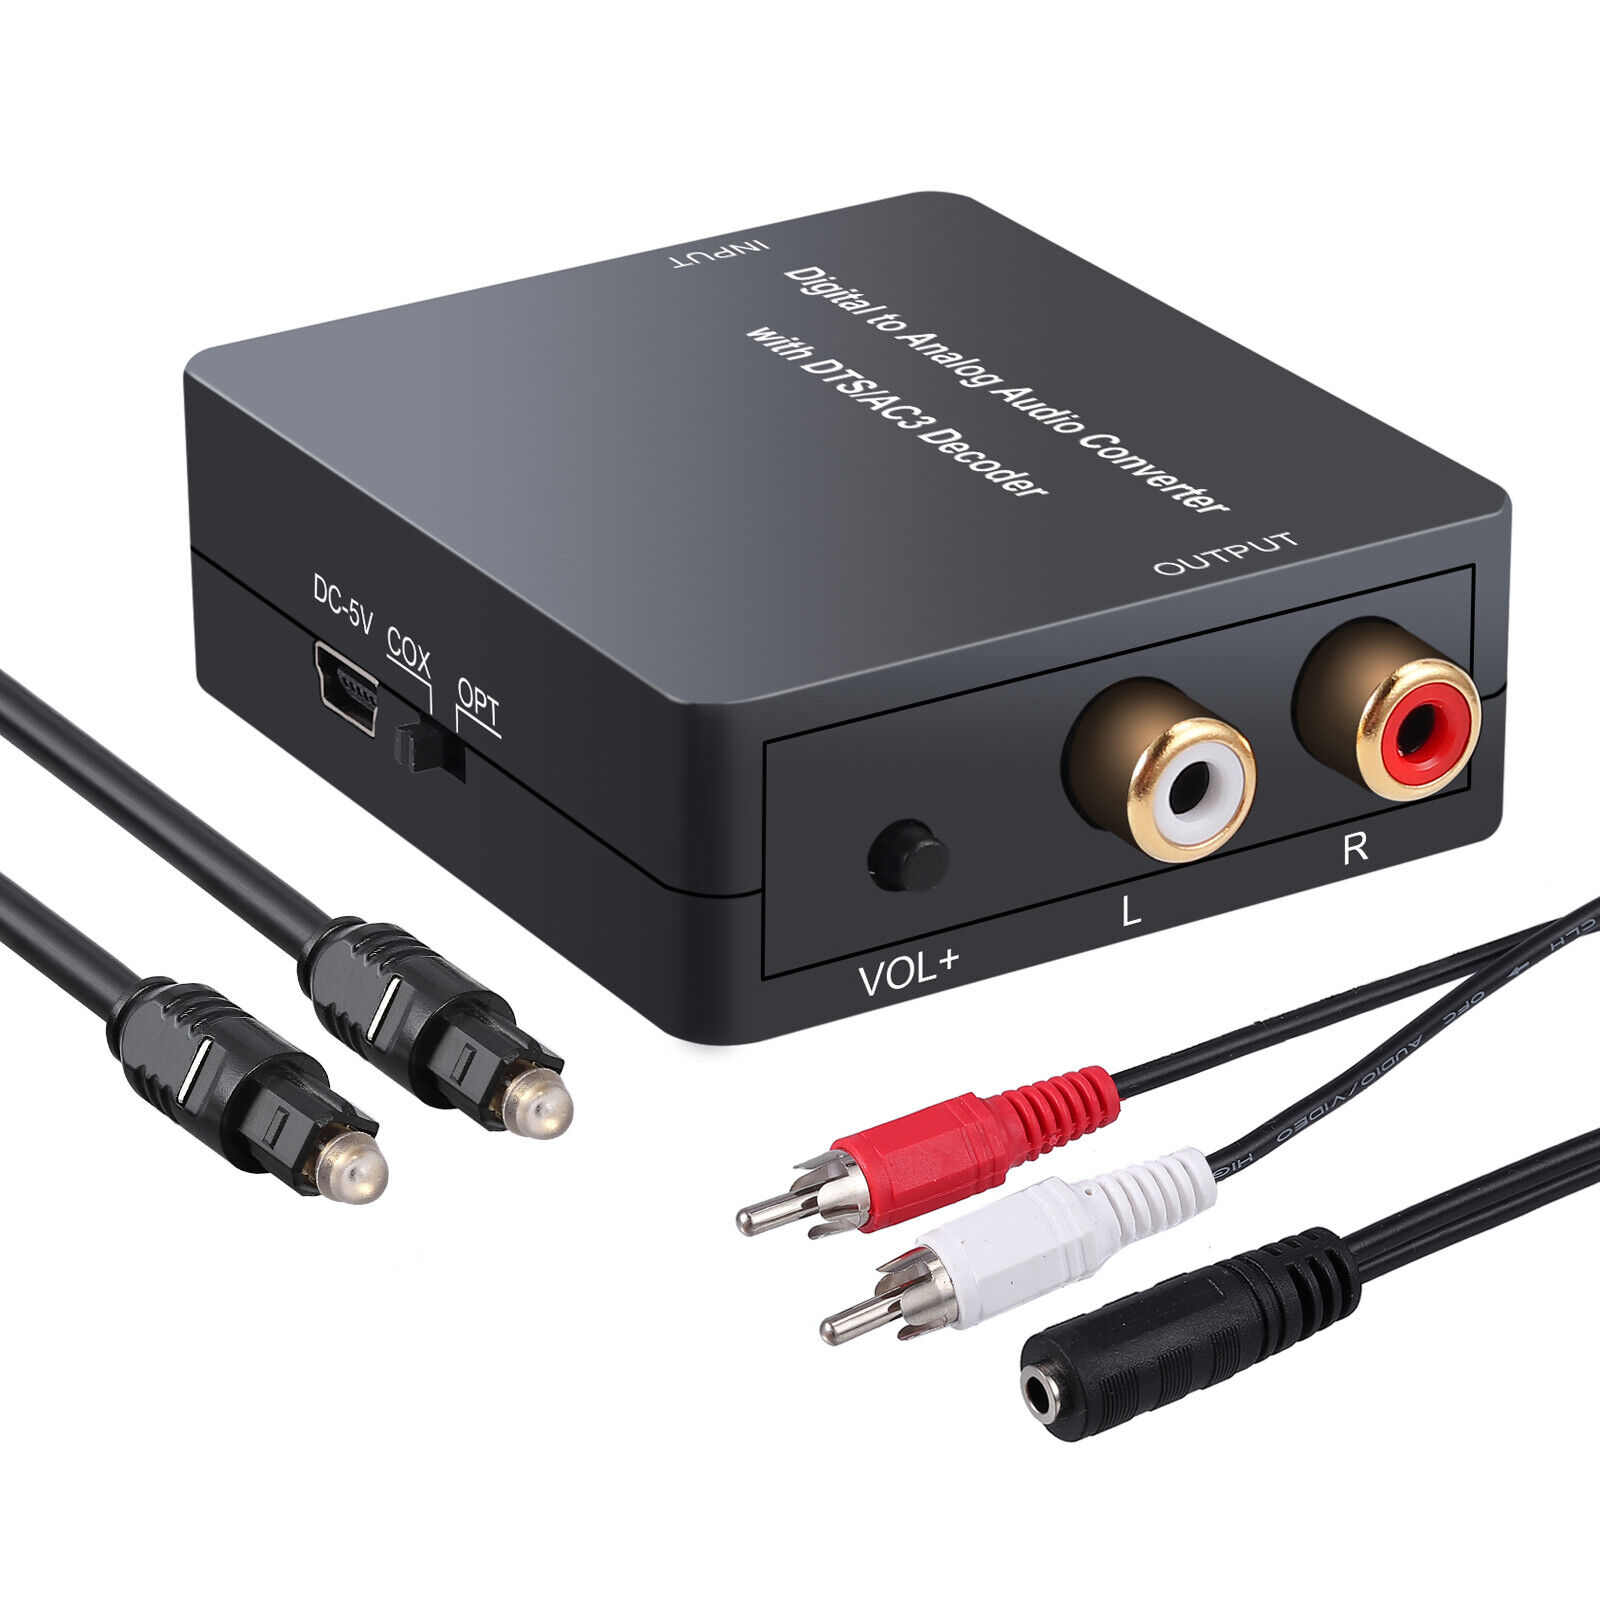 Spdif coaxial. Optical Digital Audio out кабель 5.1. Кабель Optical Audio out RCA 5.1. SPDIF Coaxial to 3.5mm Jack. Digital Audio out Optical SPDIF.